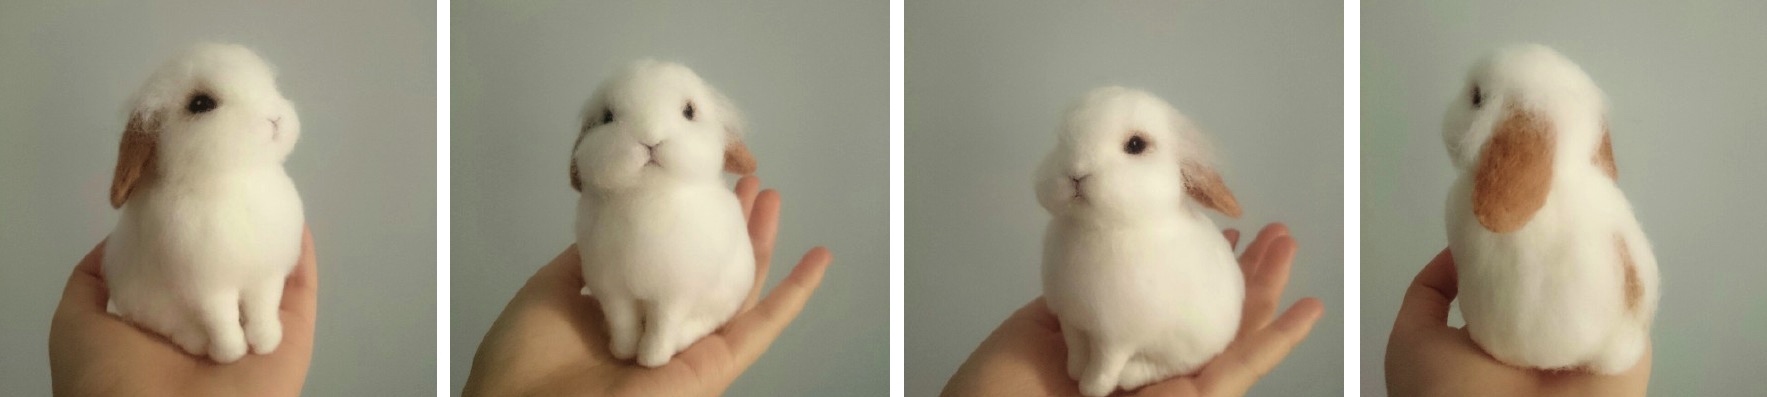 This Adorable Bunny Is Fake